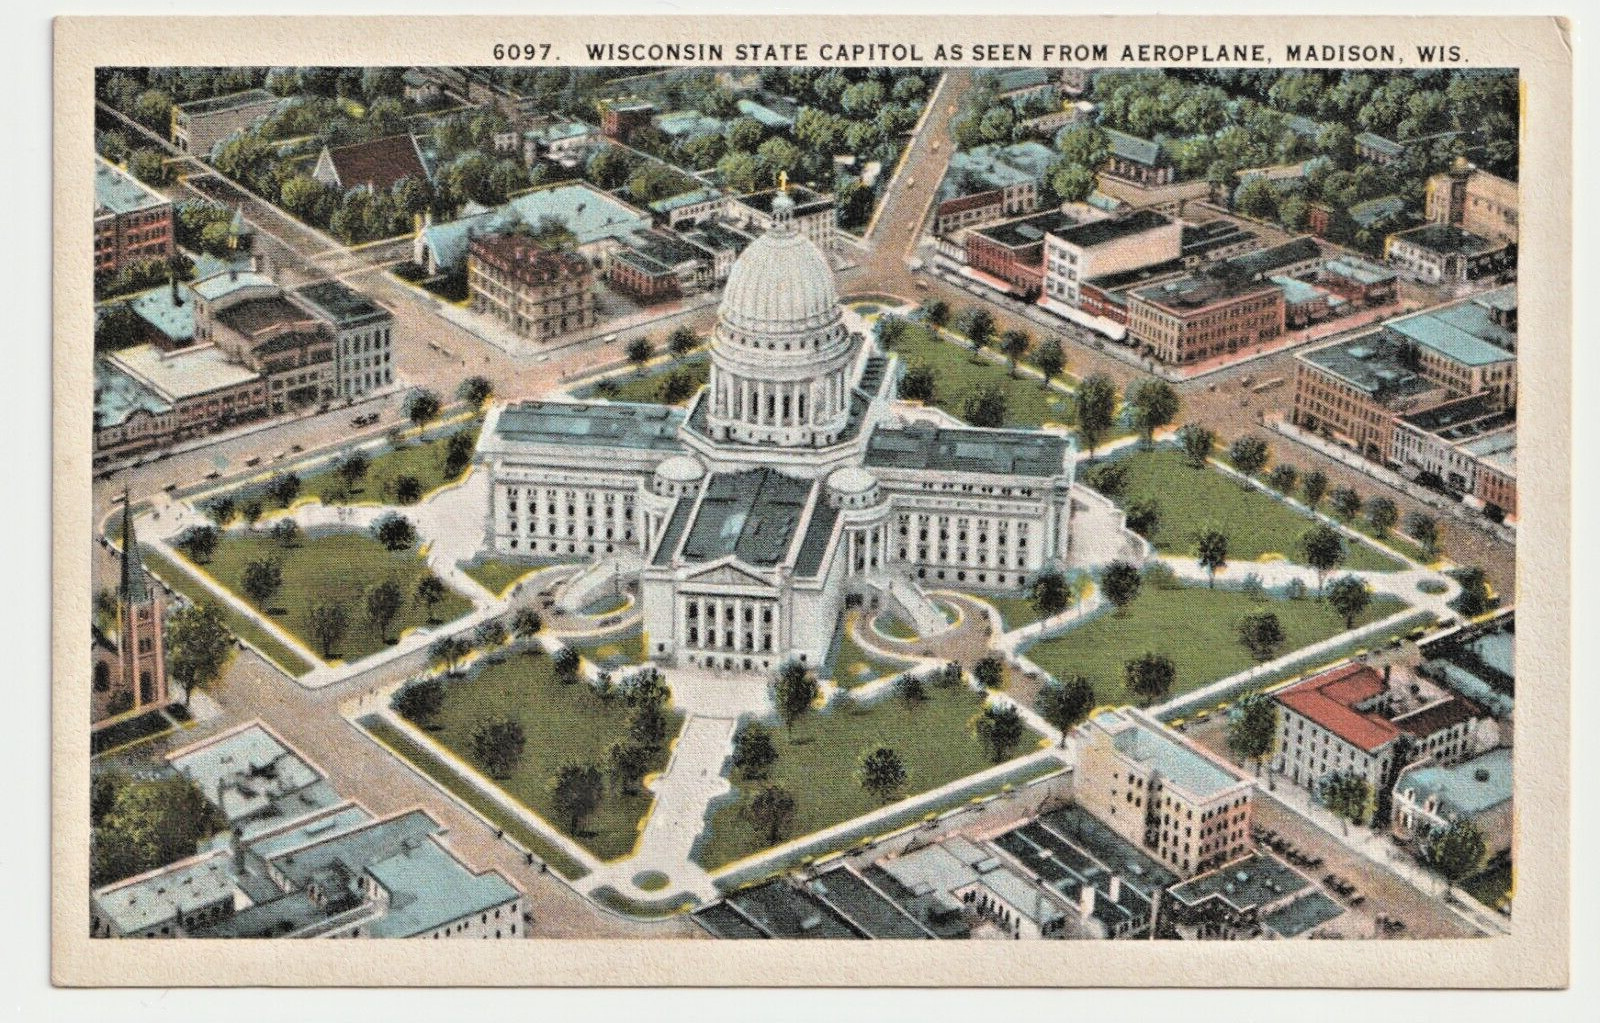 Wisconsin State Capitol As Seen From Aeroplane-Madison,Wis-antique postcard